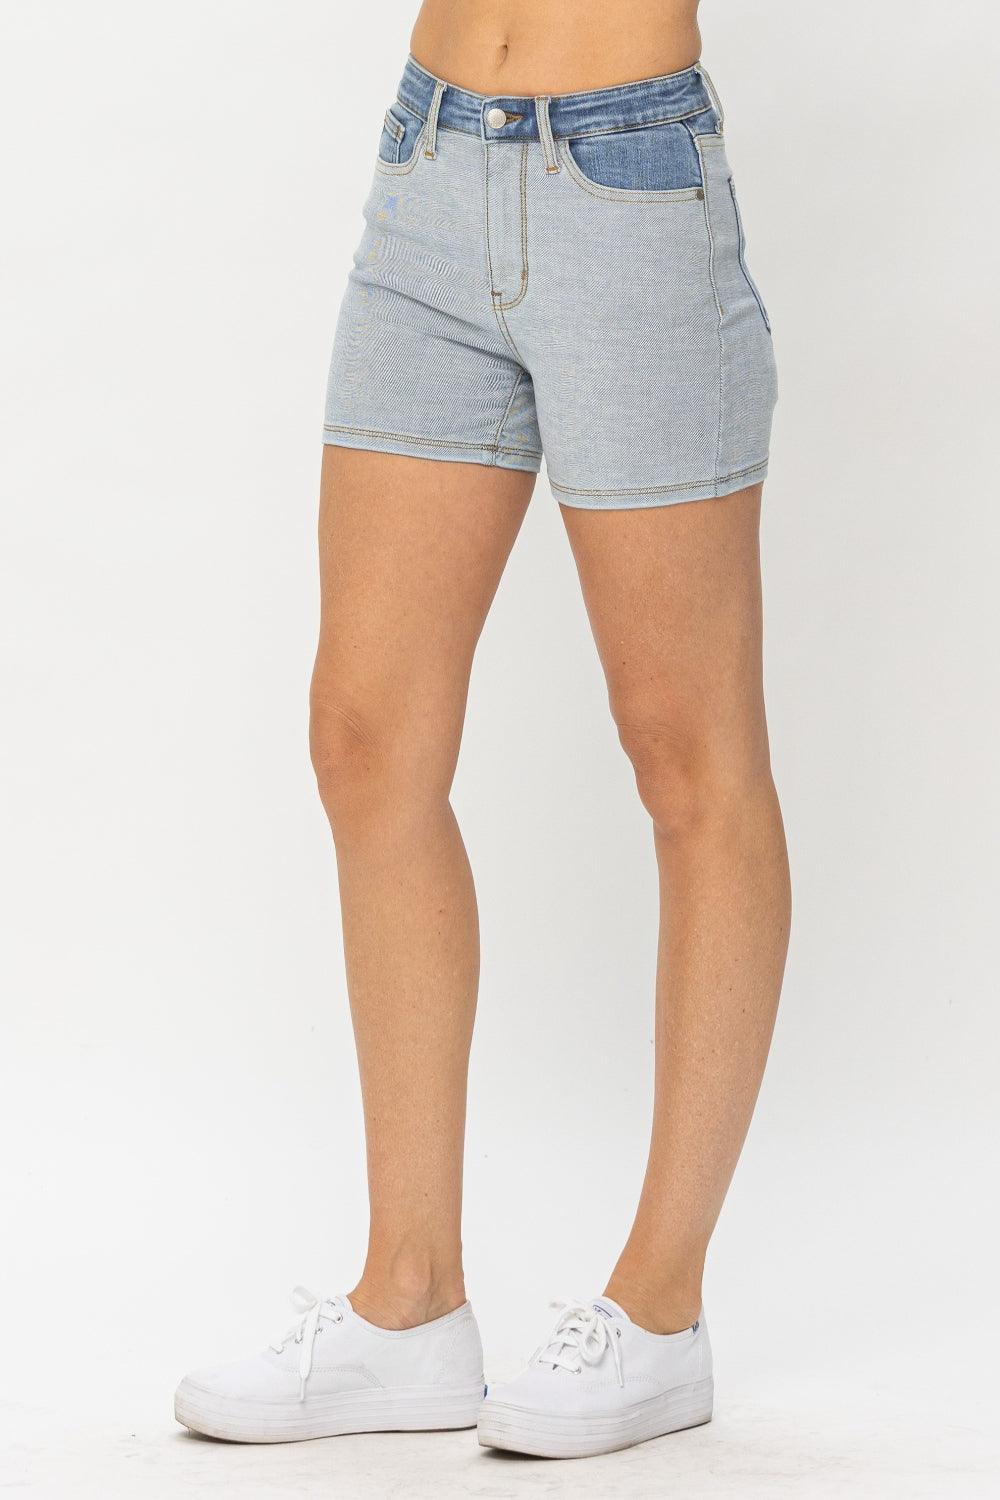 Judy Blue Full Size Color Block Denim Shorts - God's Girl Gifts And Apparel